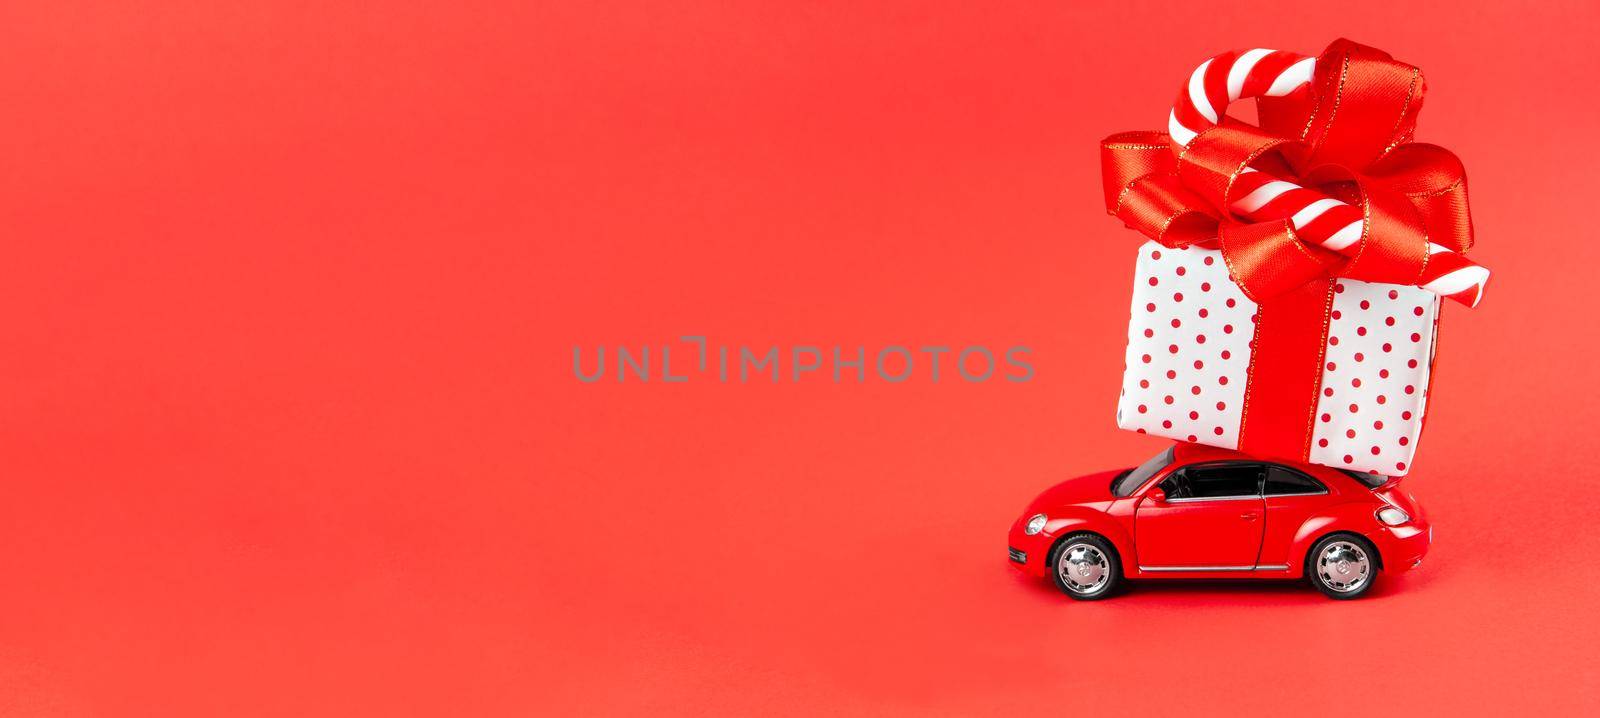 Moscow, Russia, January 14, 2021. Banner minimal design for celebrating christmas or new year greeting card. Gift delivery concept. Little red toy car with gift and candy on a red background. by chelmicky